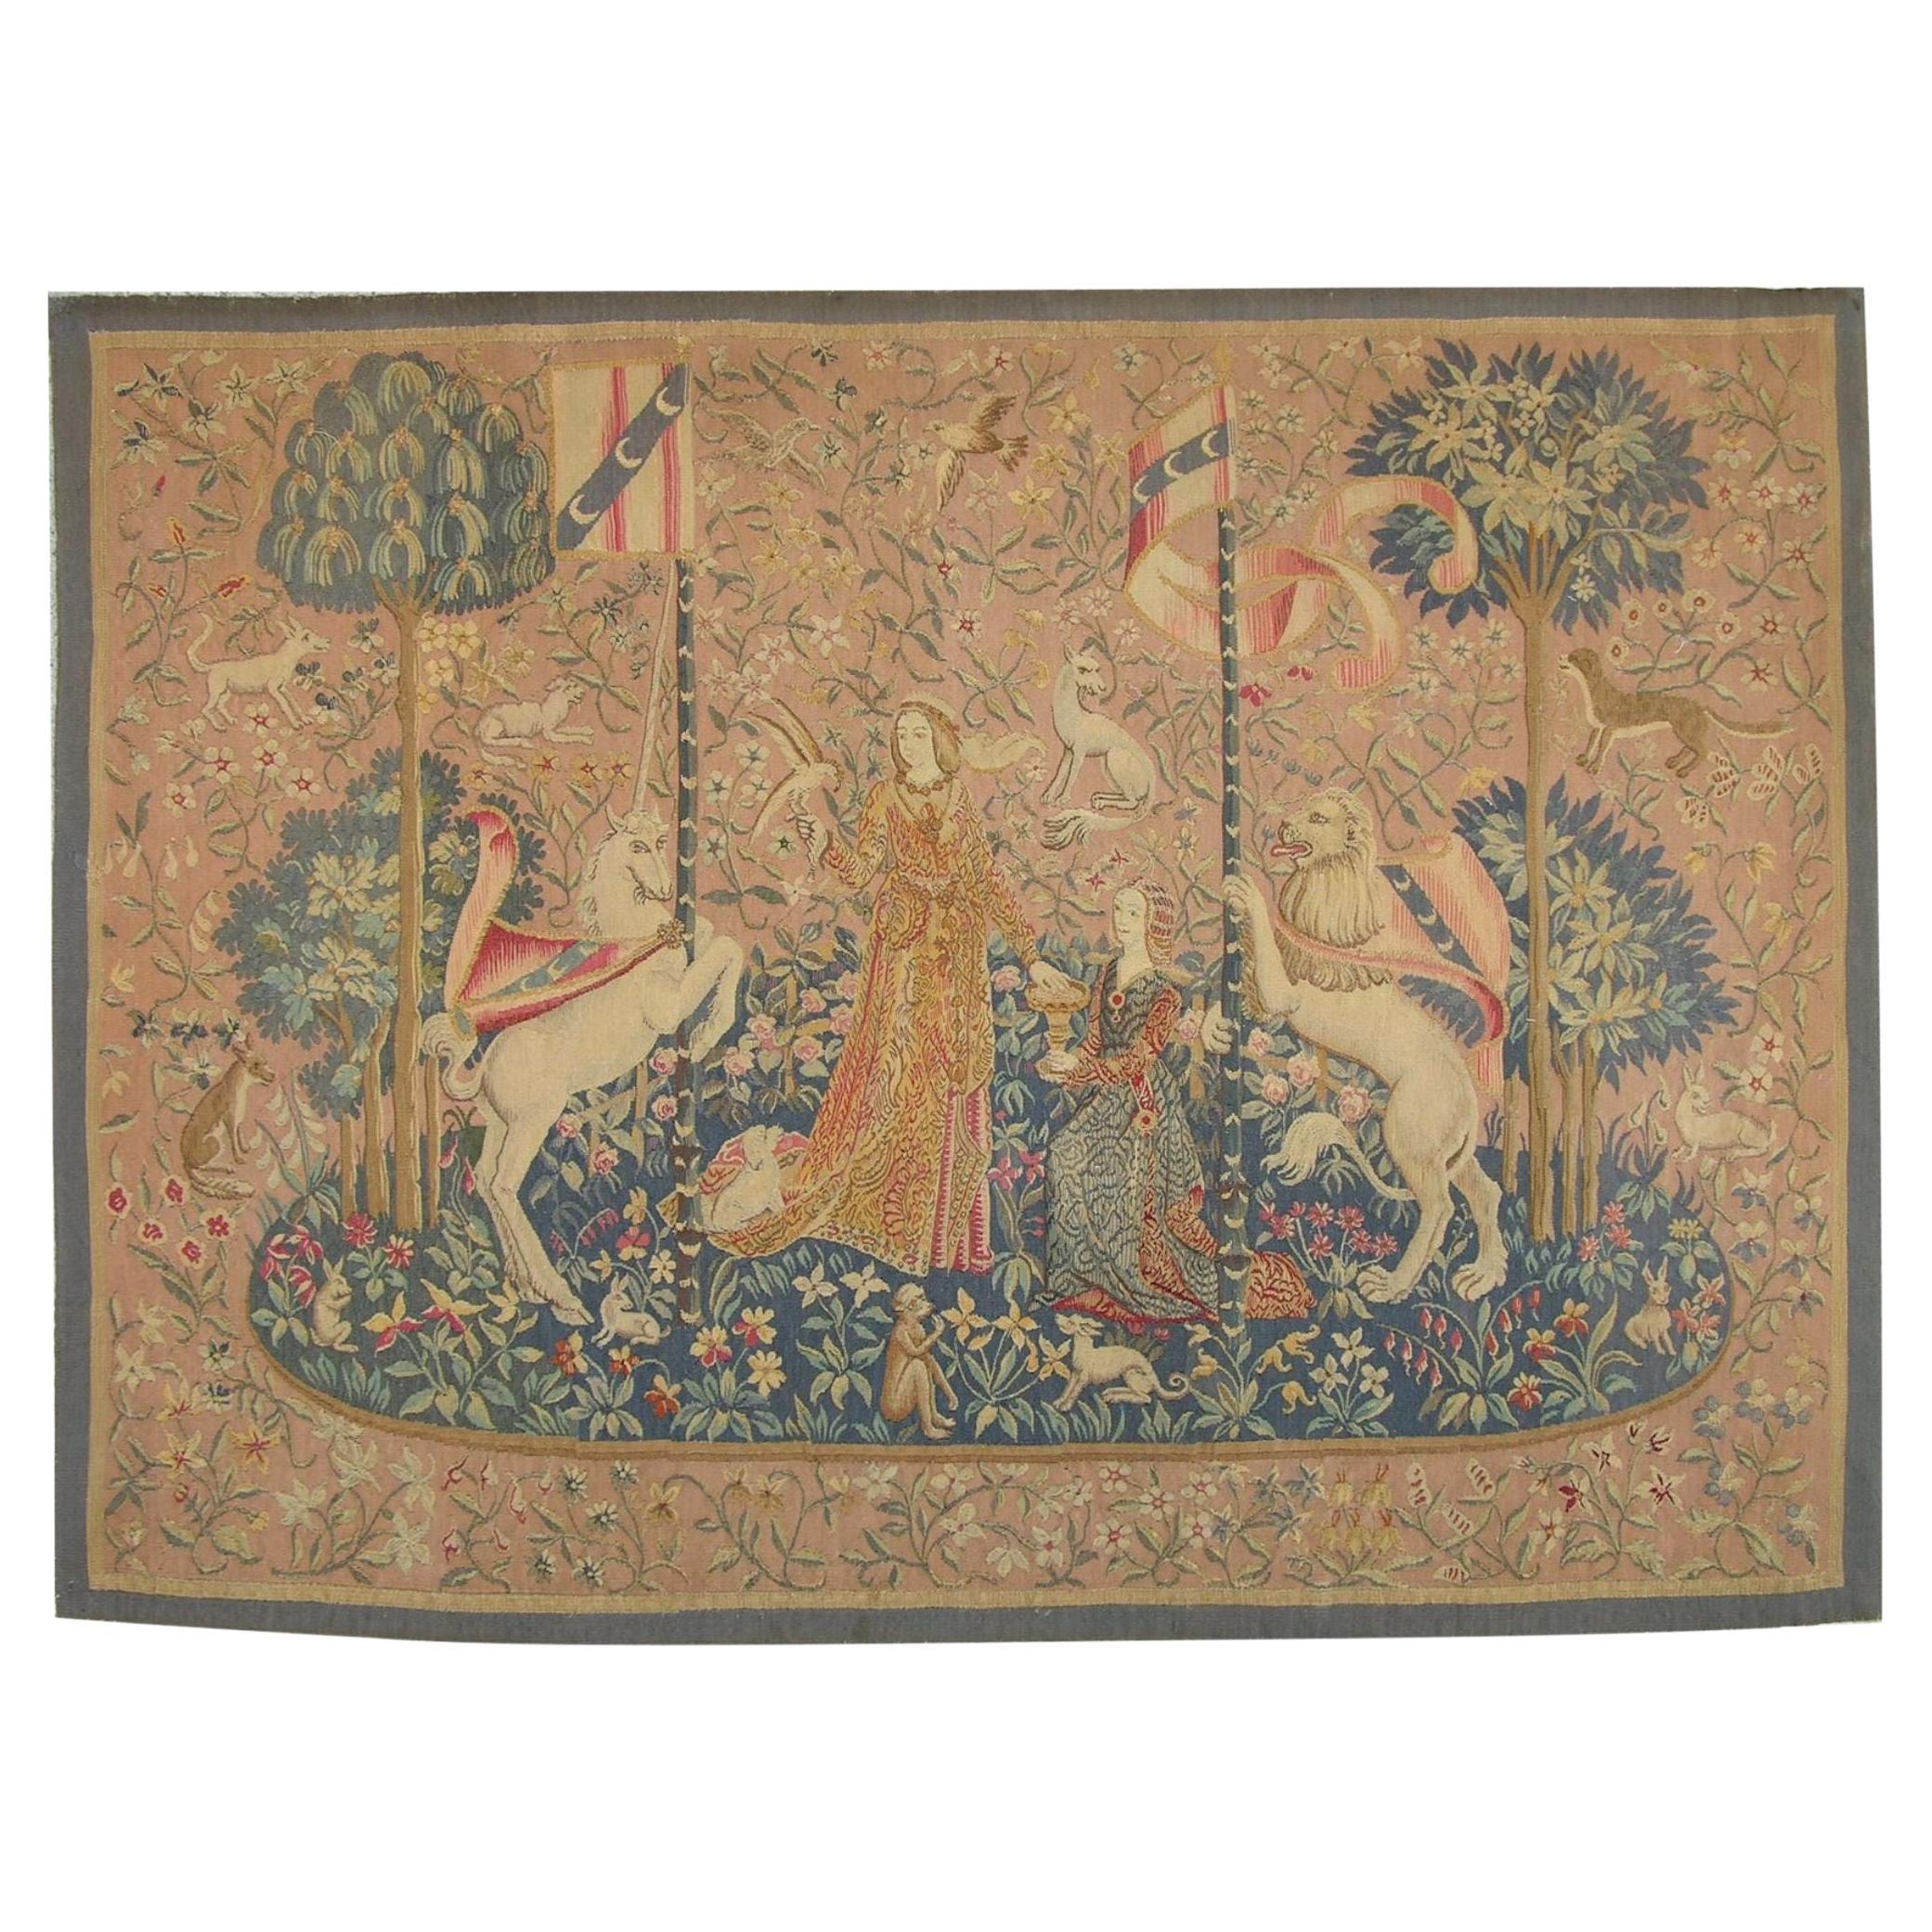 Antique Printed 1920 Tapestry 5'3" X 3'10" For Sale